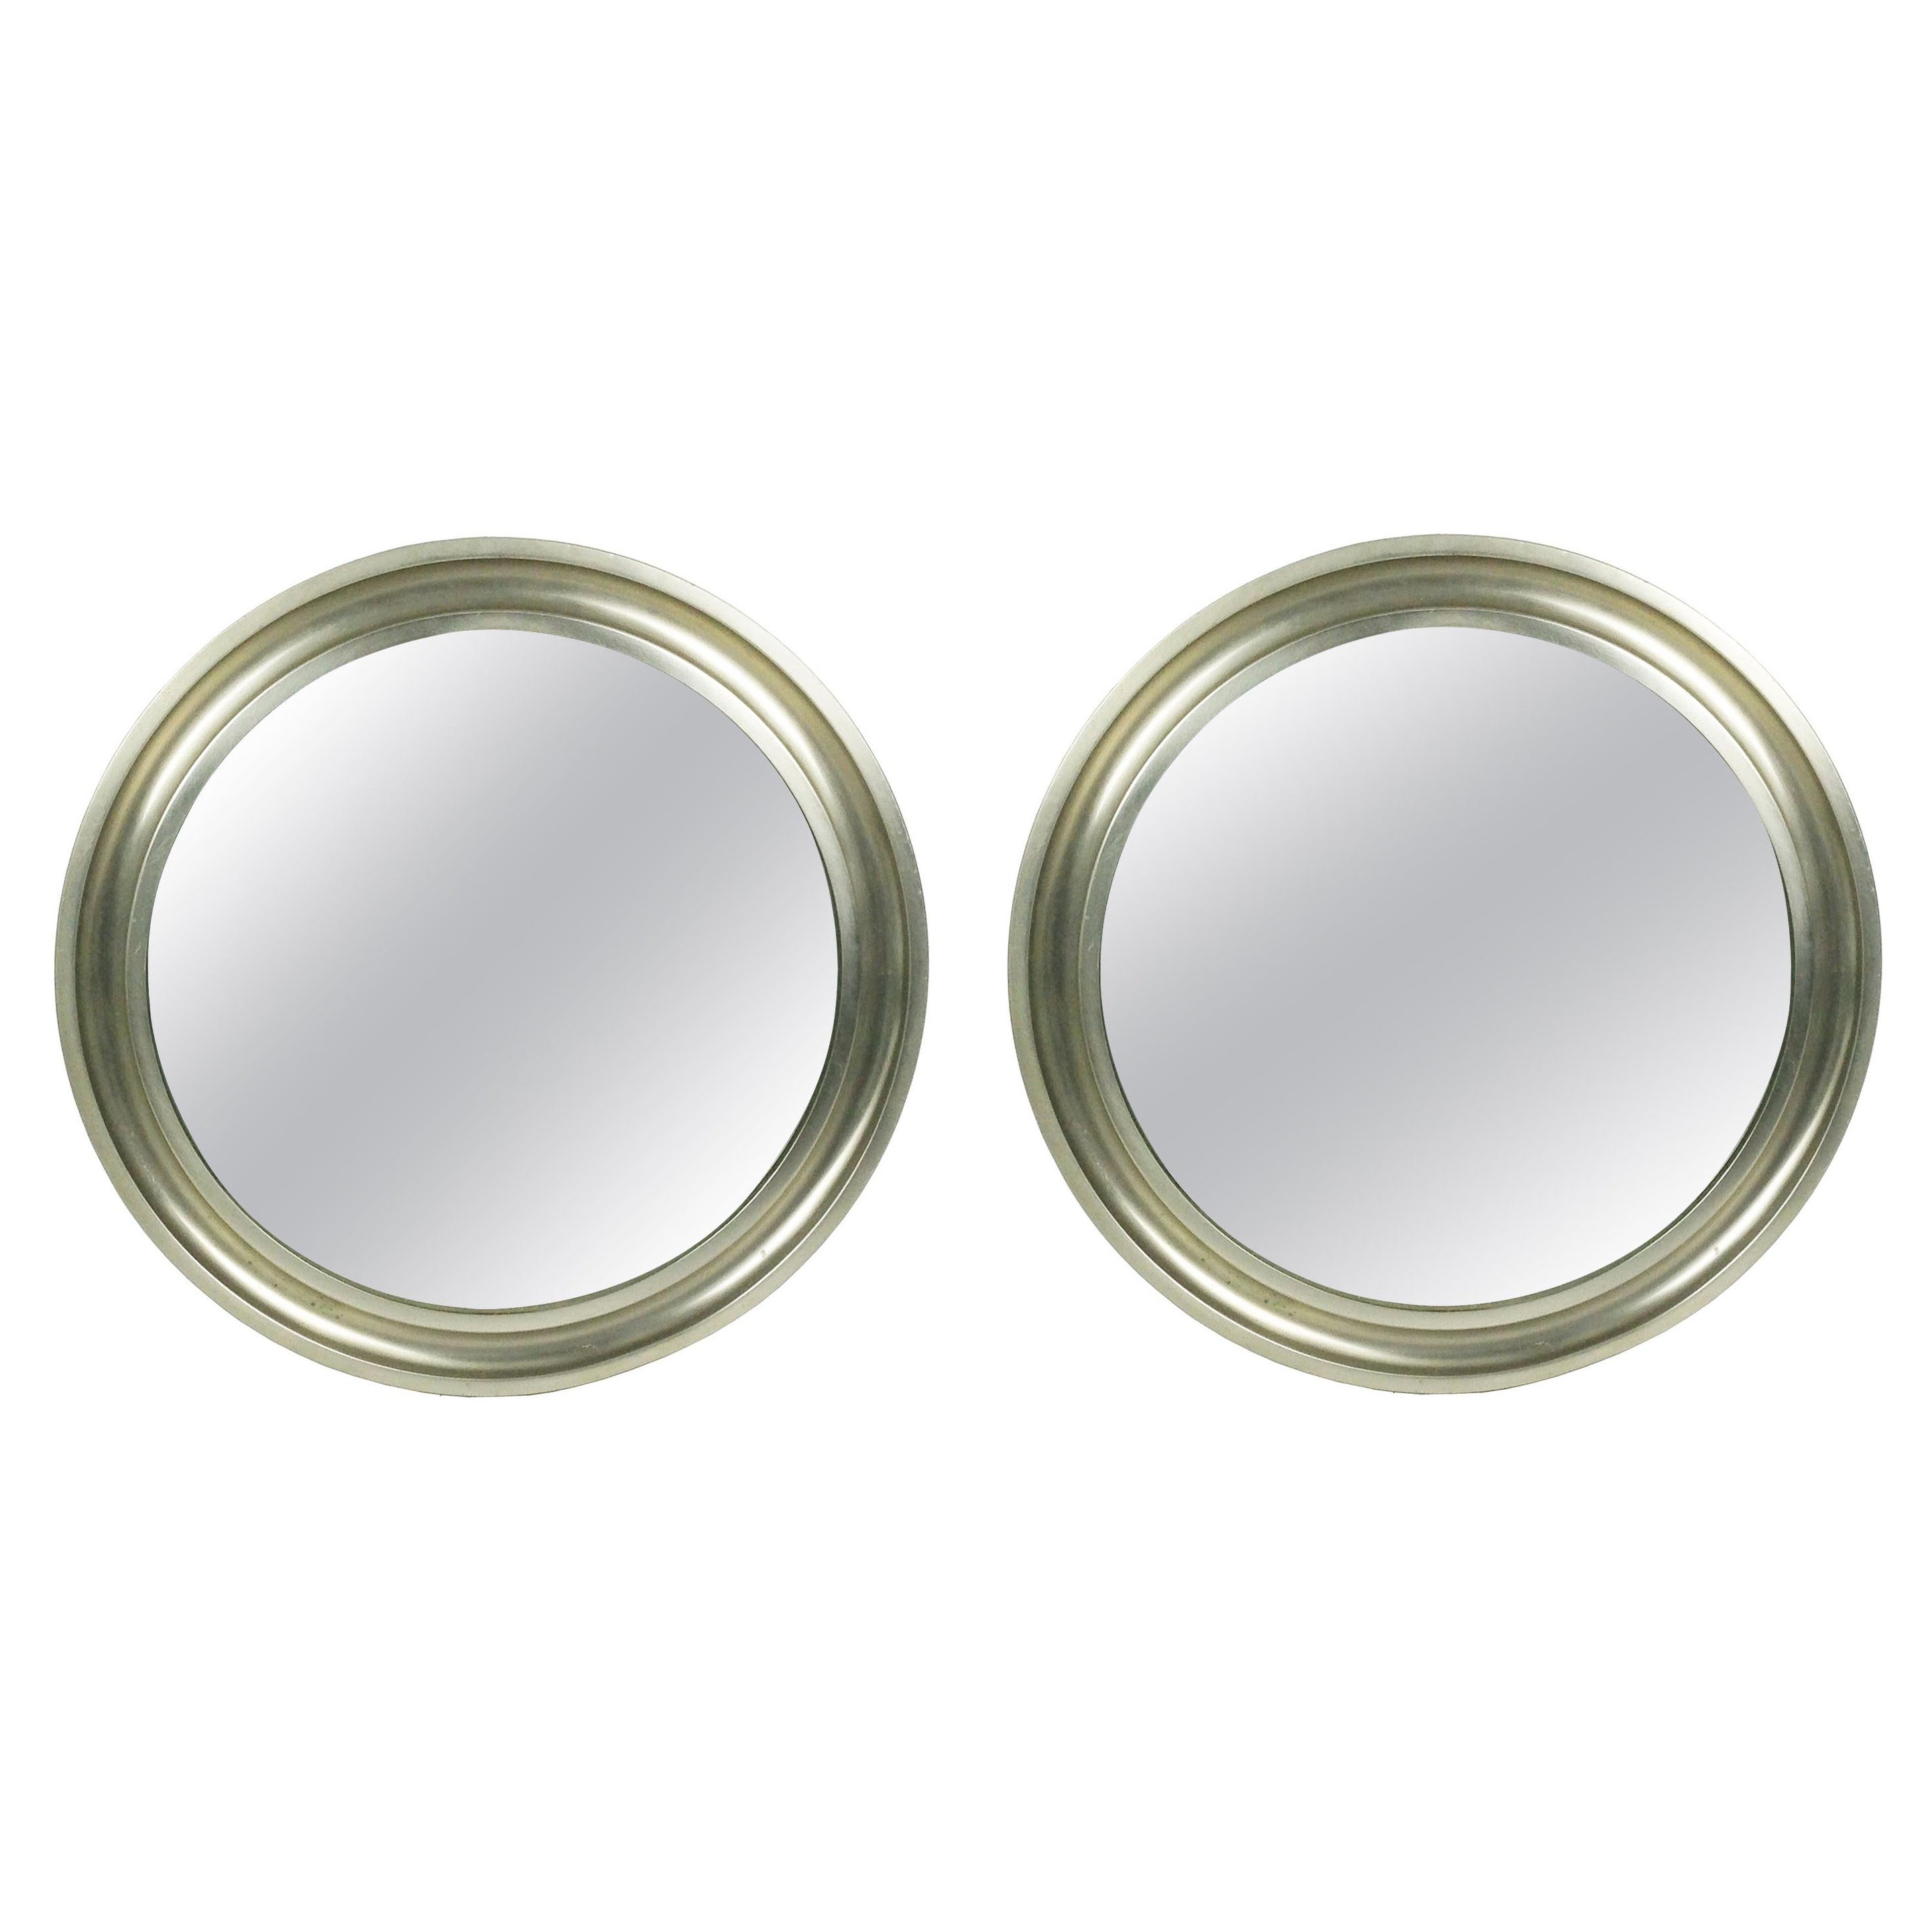 Pair of Nickeled and Black Metal small Specchio Mirrors by S. Mazza for Artemide